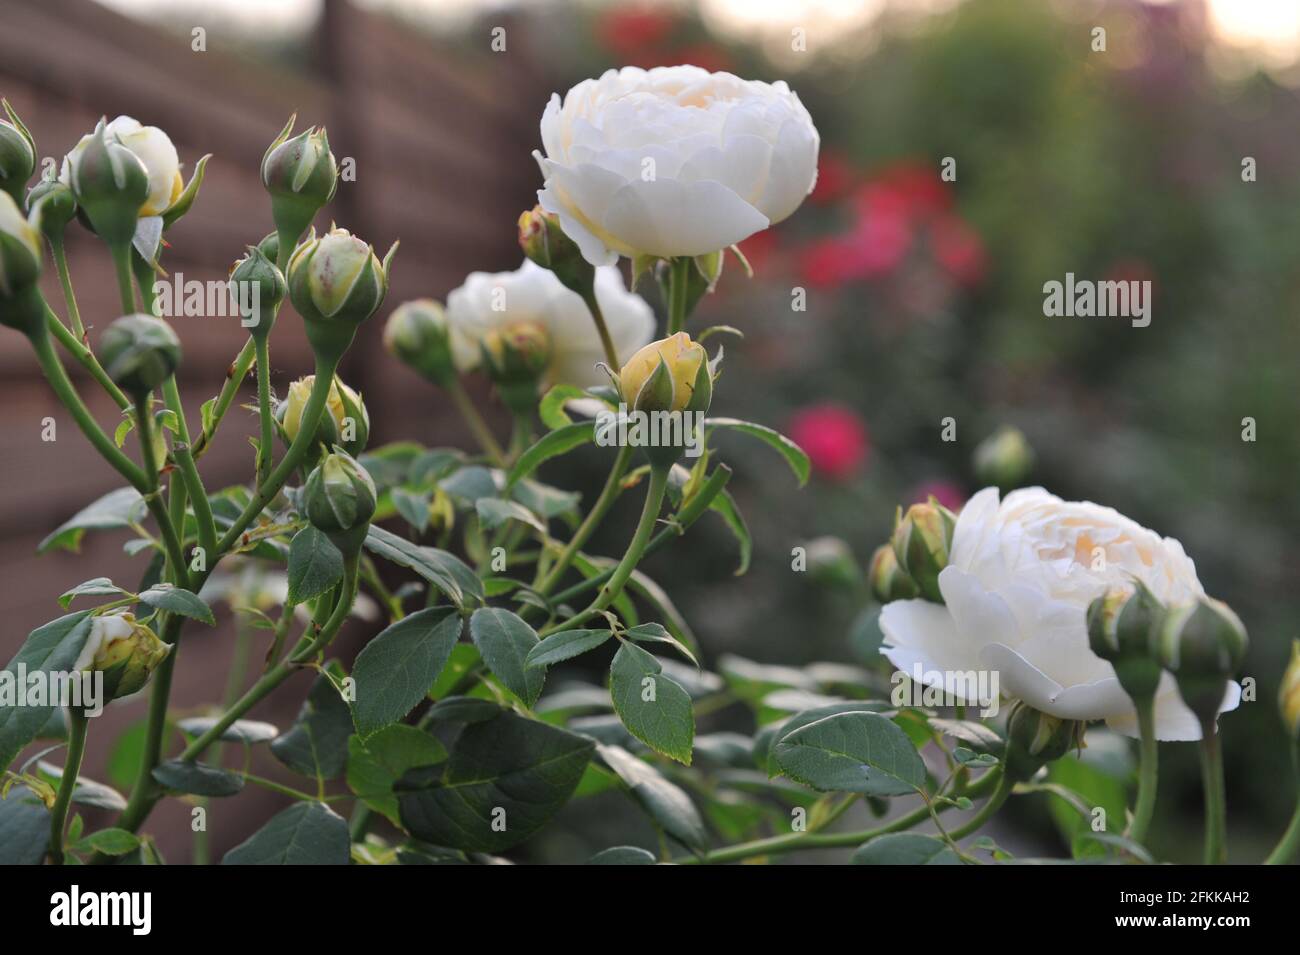 White English shrub rose (Rosa) Claire Austin blooms in a garden in summer Stock Photo